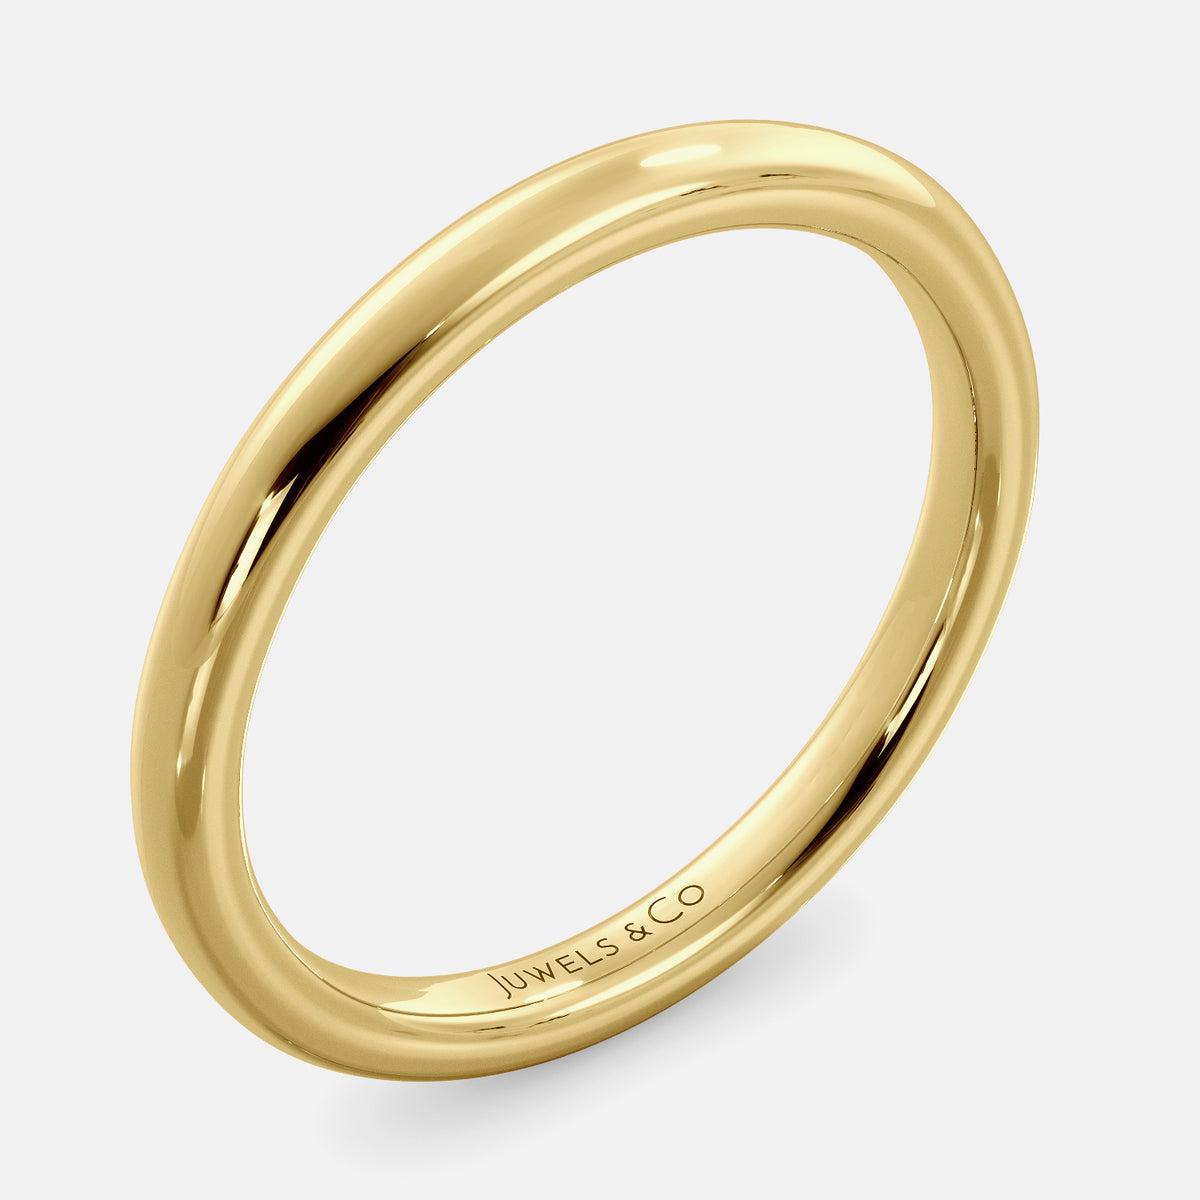 A close-up of a simple round wedding band in 14K yellow gold. The band is a classic and timeless design that is perfect for any occasion.